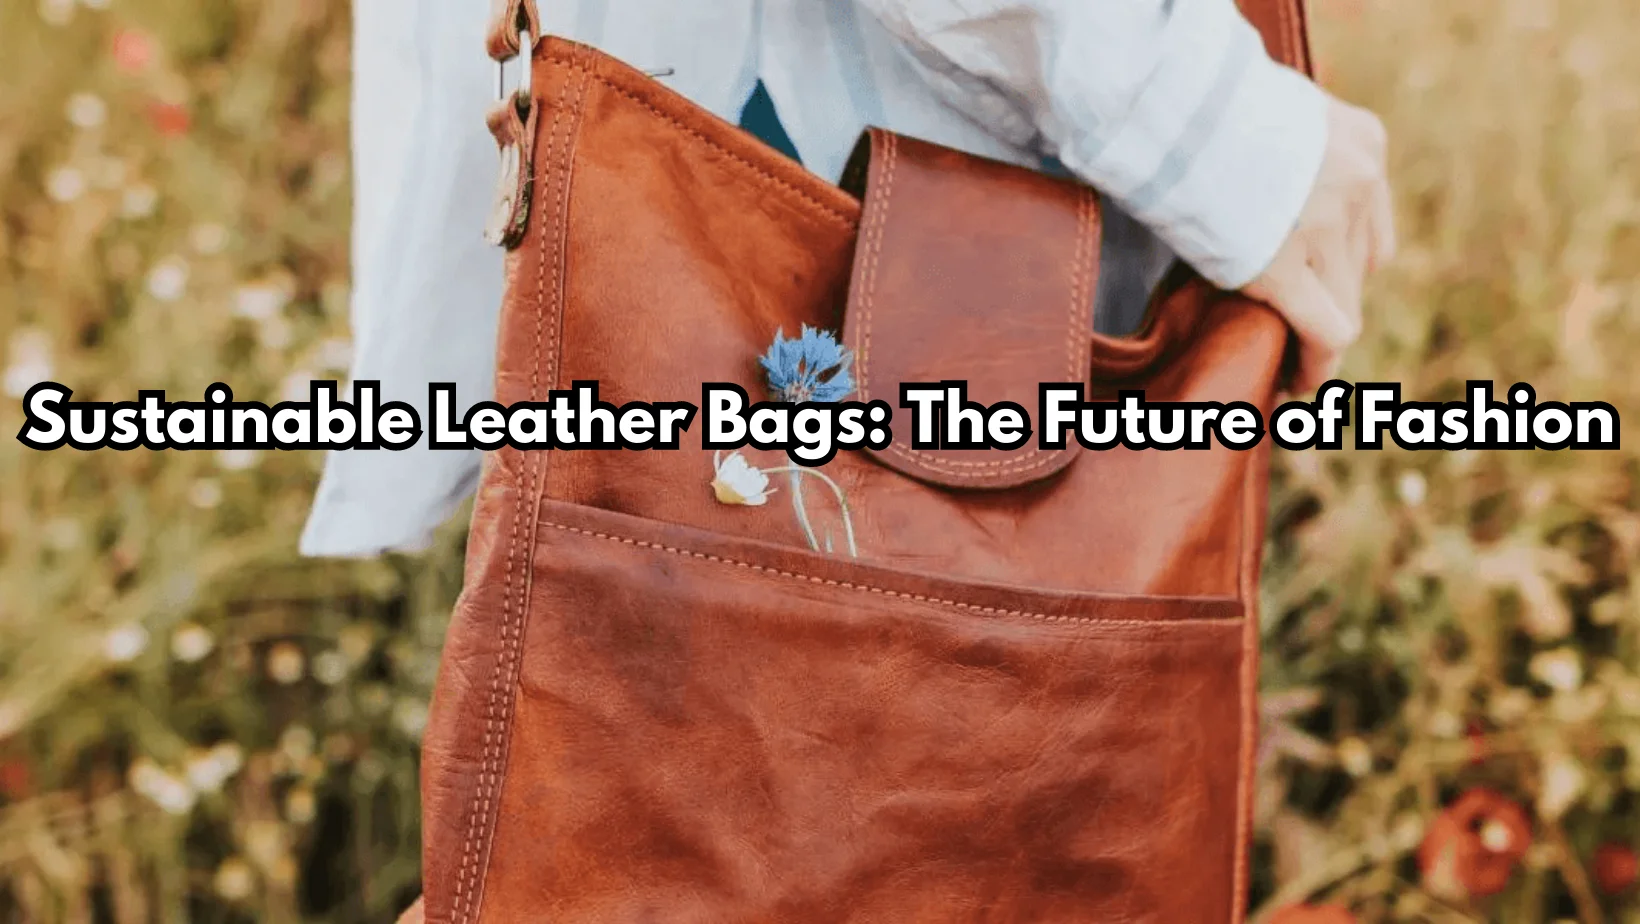 Sustainable Leather Bags: The Future of Fashion